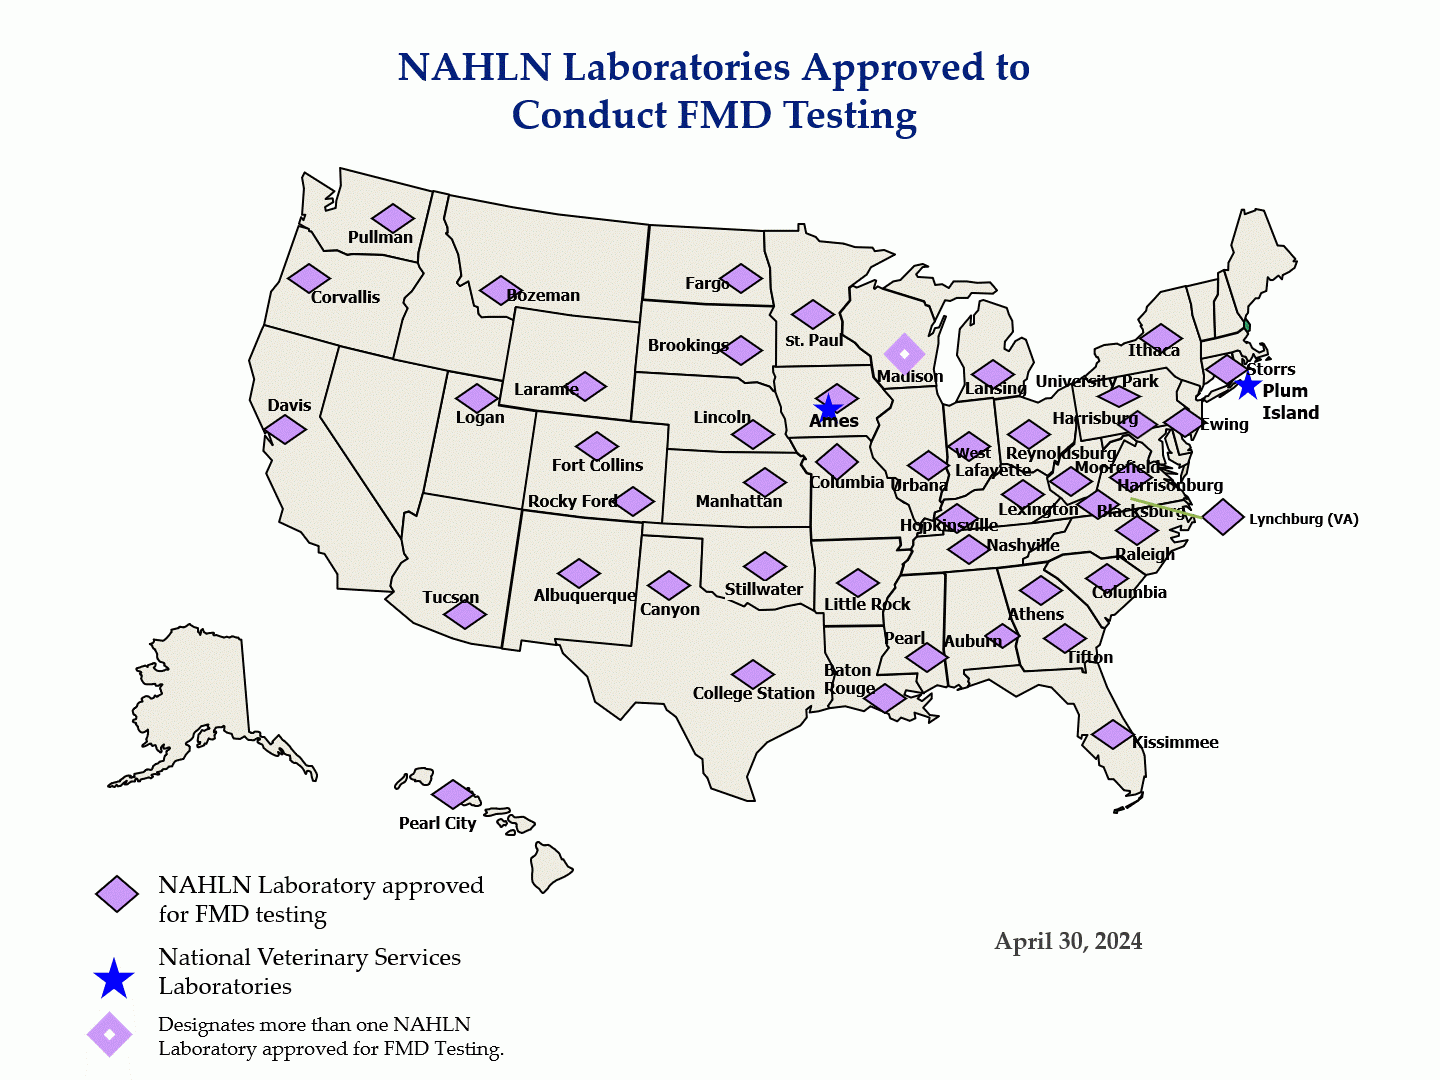 U.S. map showing locations of NAHLN laboratories approved to conduct FMD testing